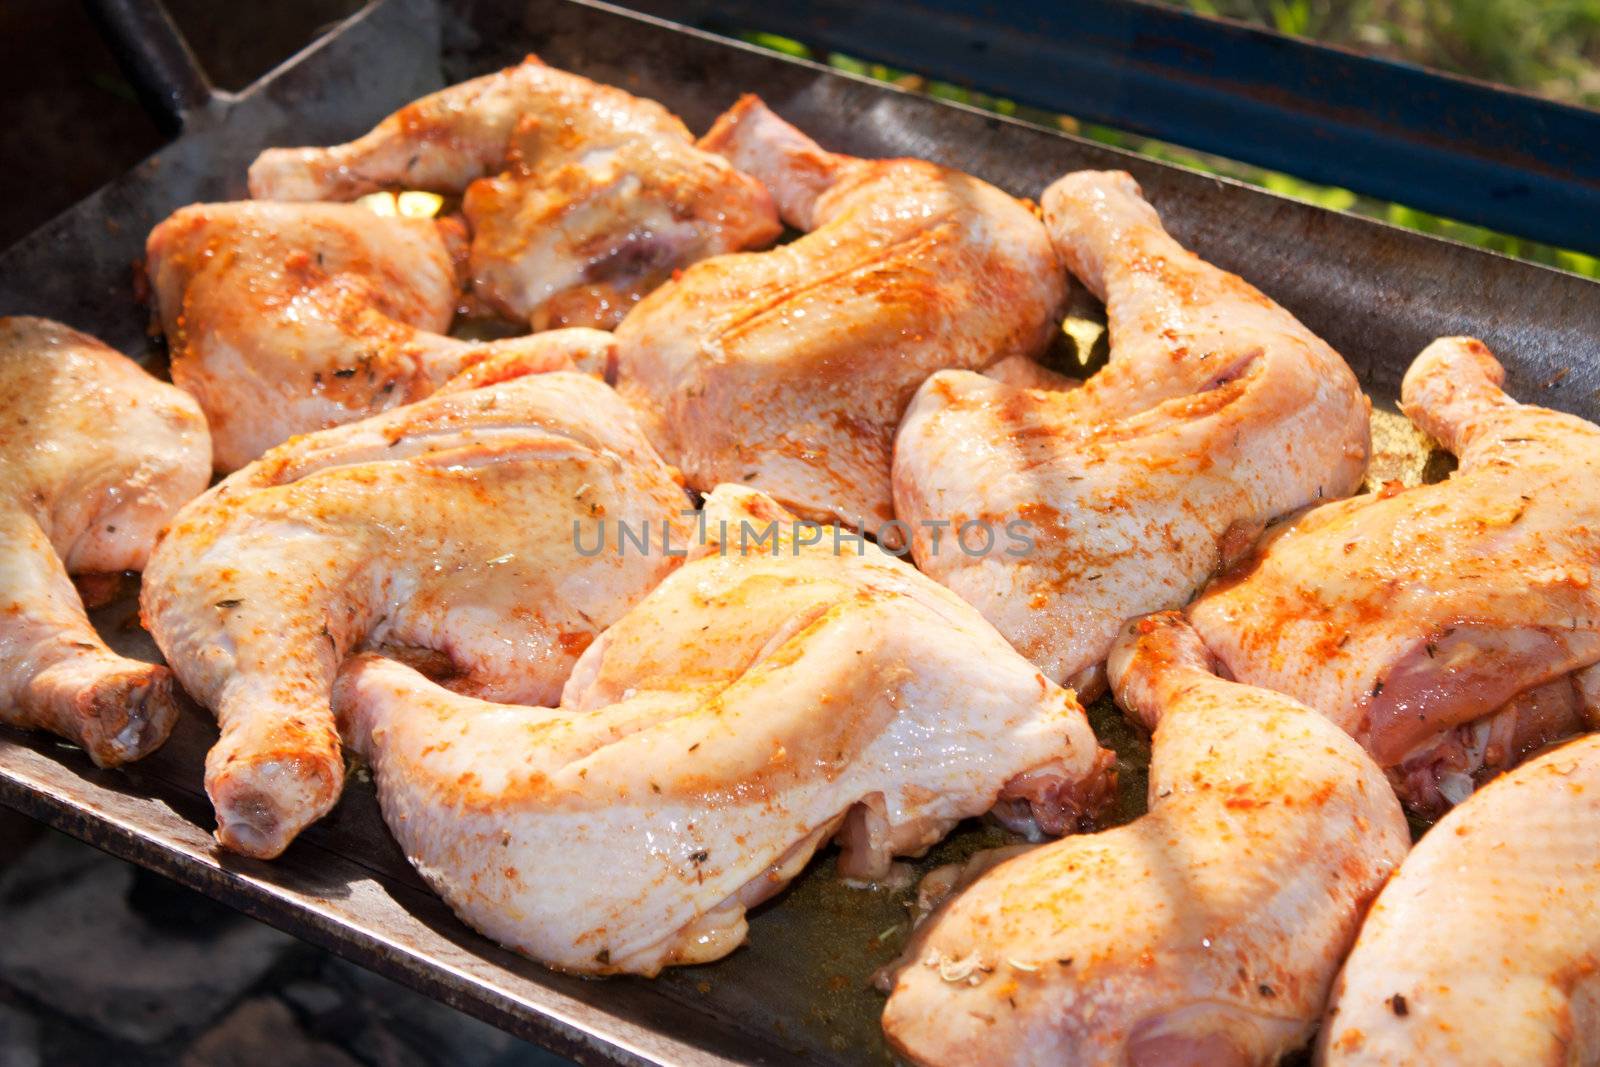 Chicken with honey and spices, cooking on a wood fire